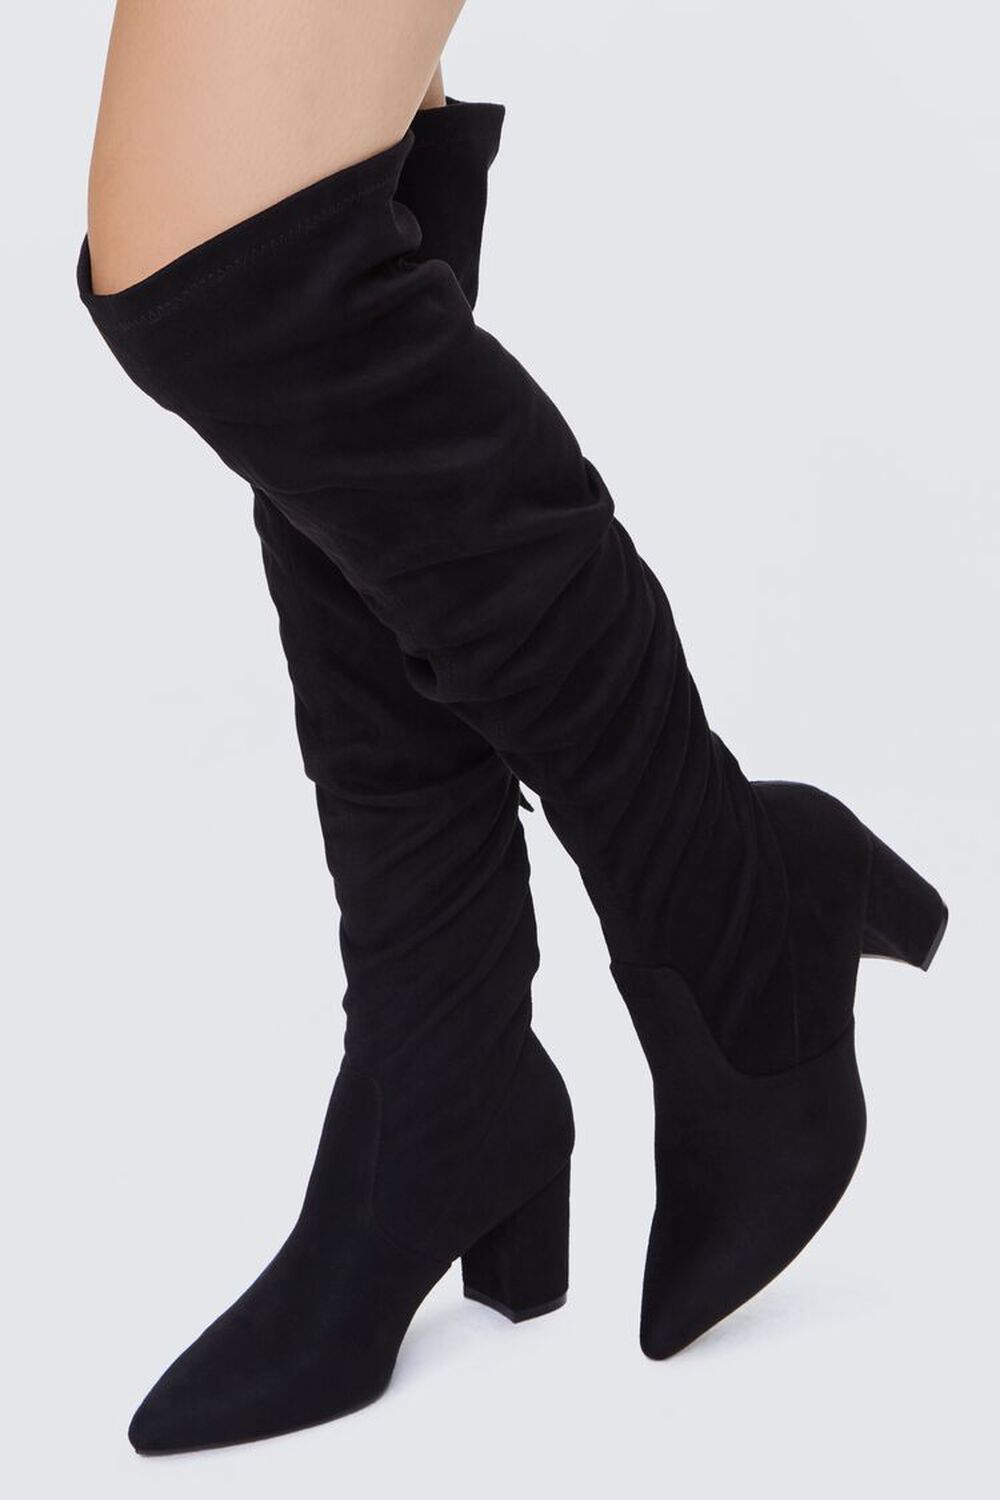 BLACK Faux Suede Over-the-Knee Boots, image 1